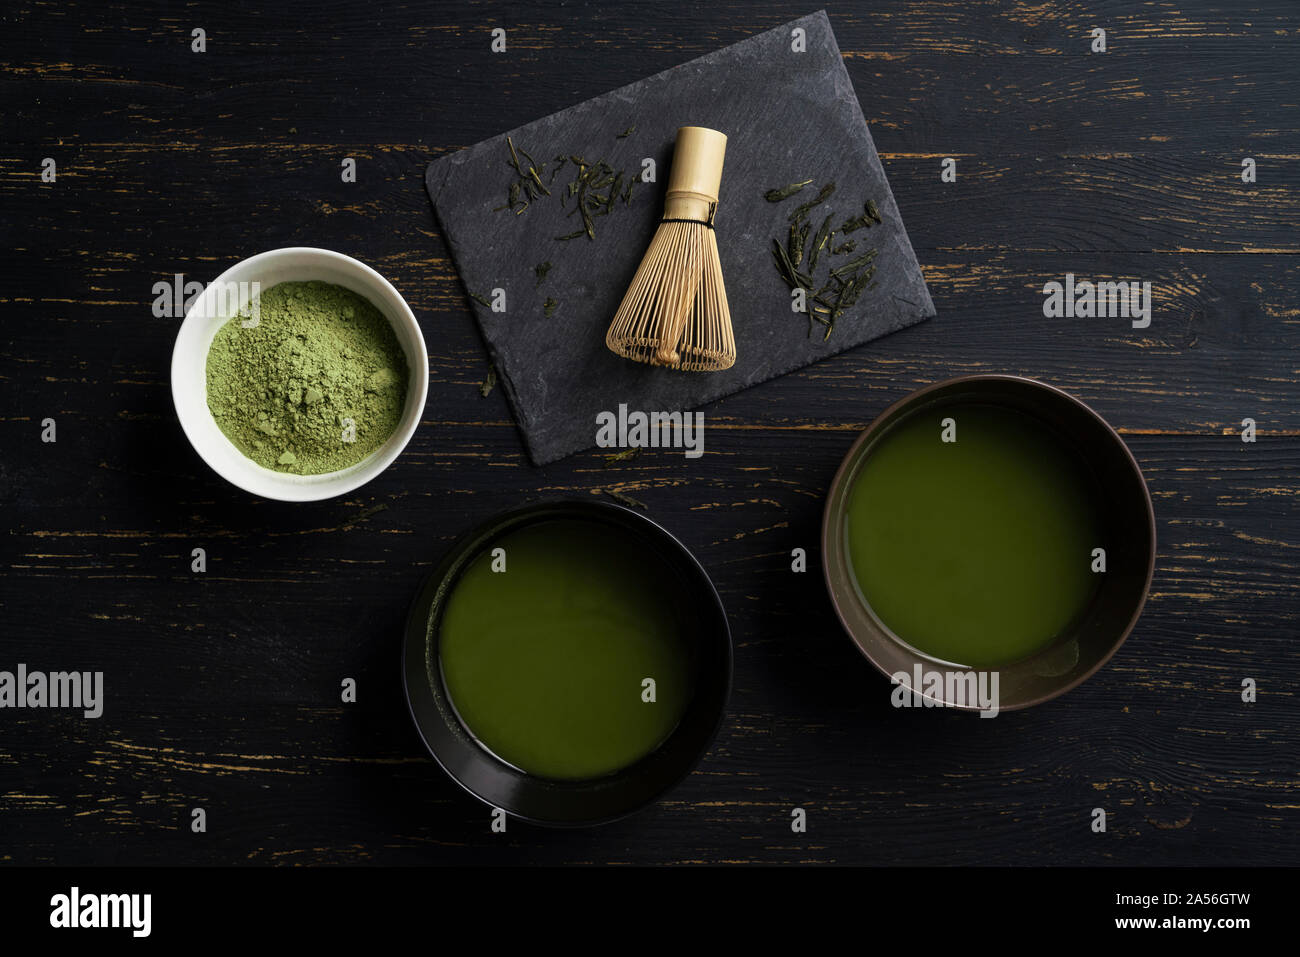 Still life of matcha tea preparation with whisk and bowls of matcha tea and tea powder, overhead view, low key Stock Photo